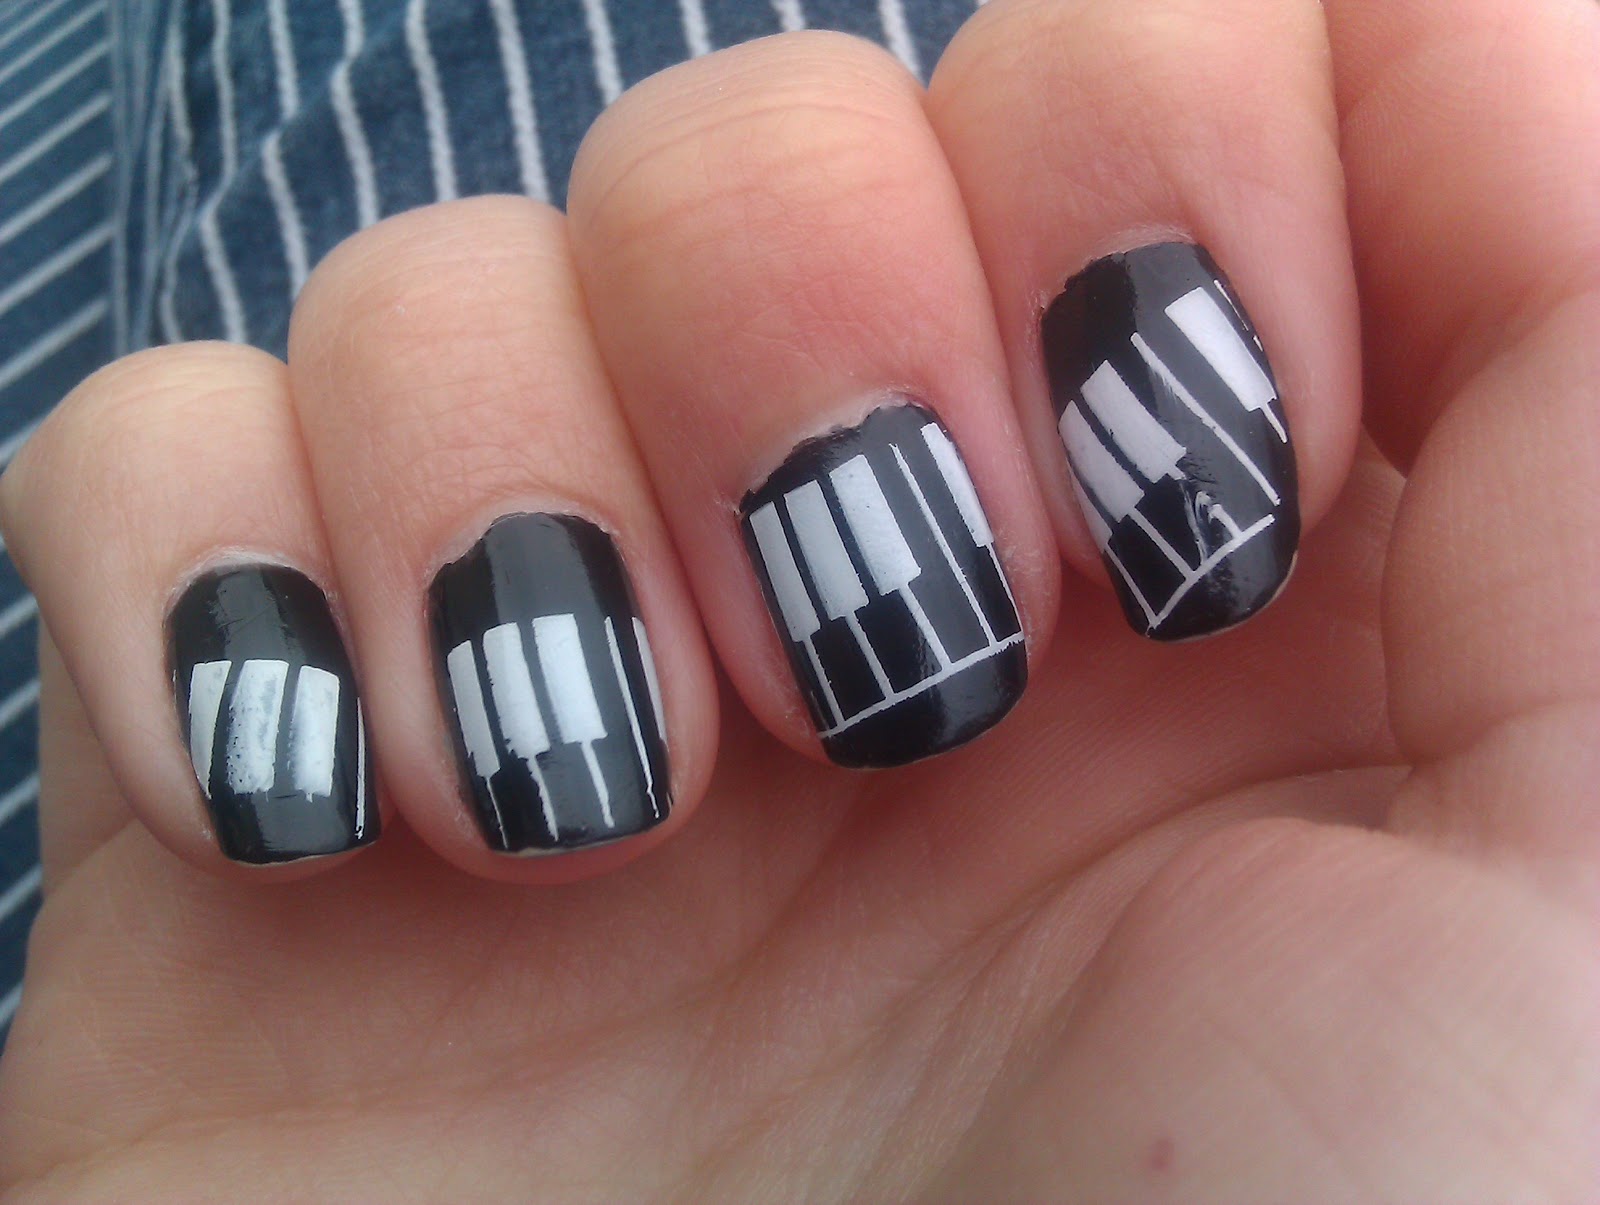 3. Black and White Piano Key Nails - wide 10